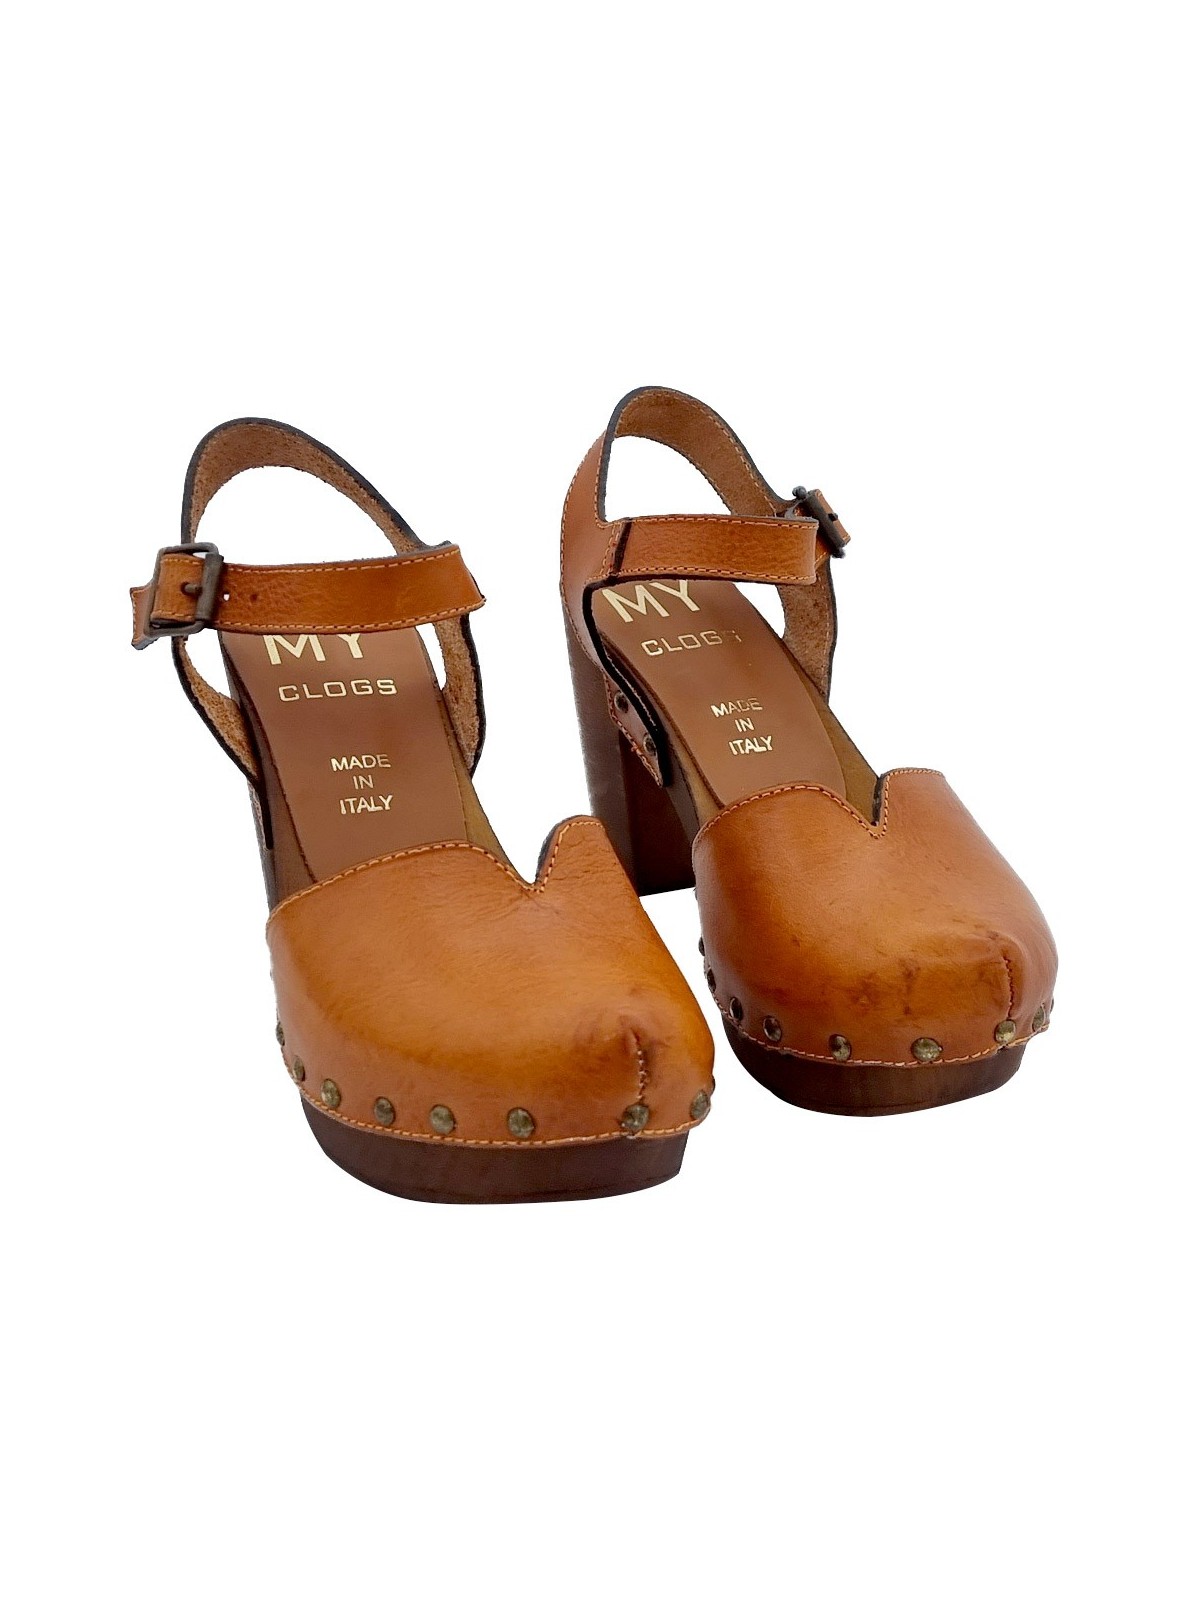 LEATHER SWEDISH SANDALS WITH STRAP